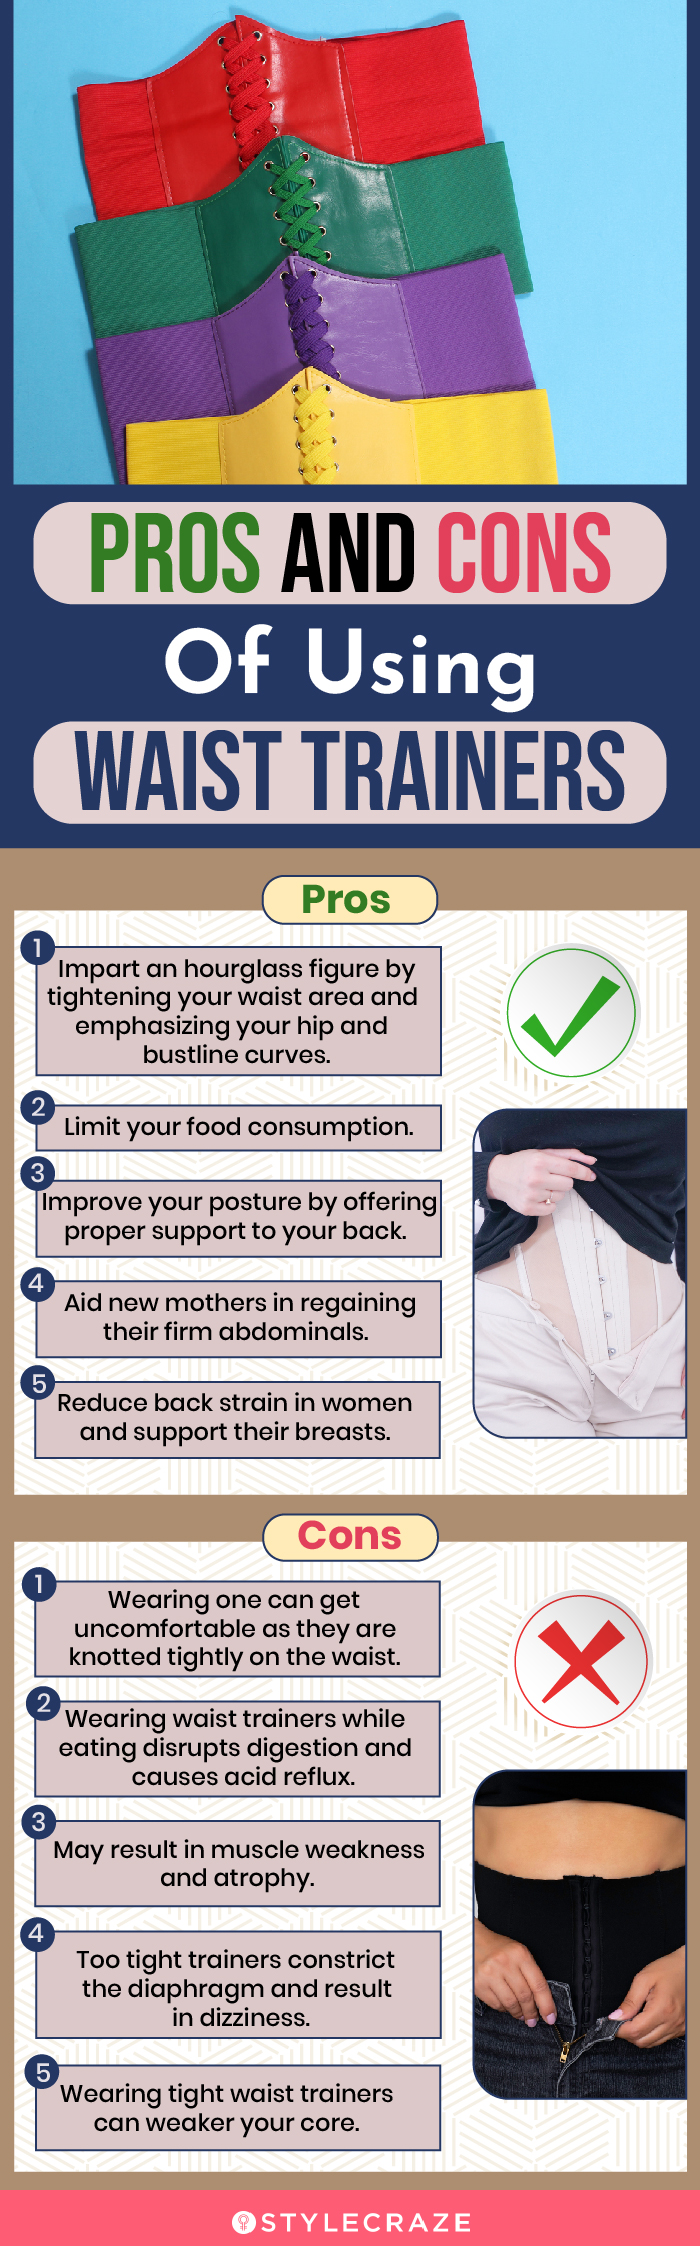 Pros And Cons Of Using Waist Trainers (infographic)